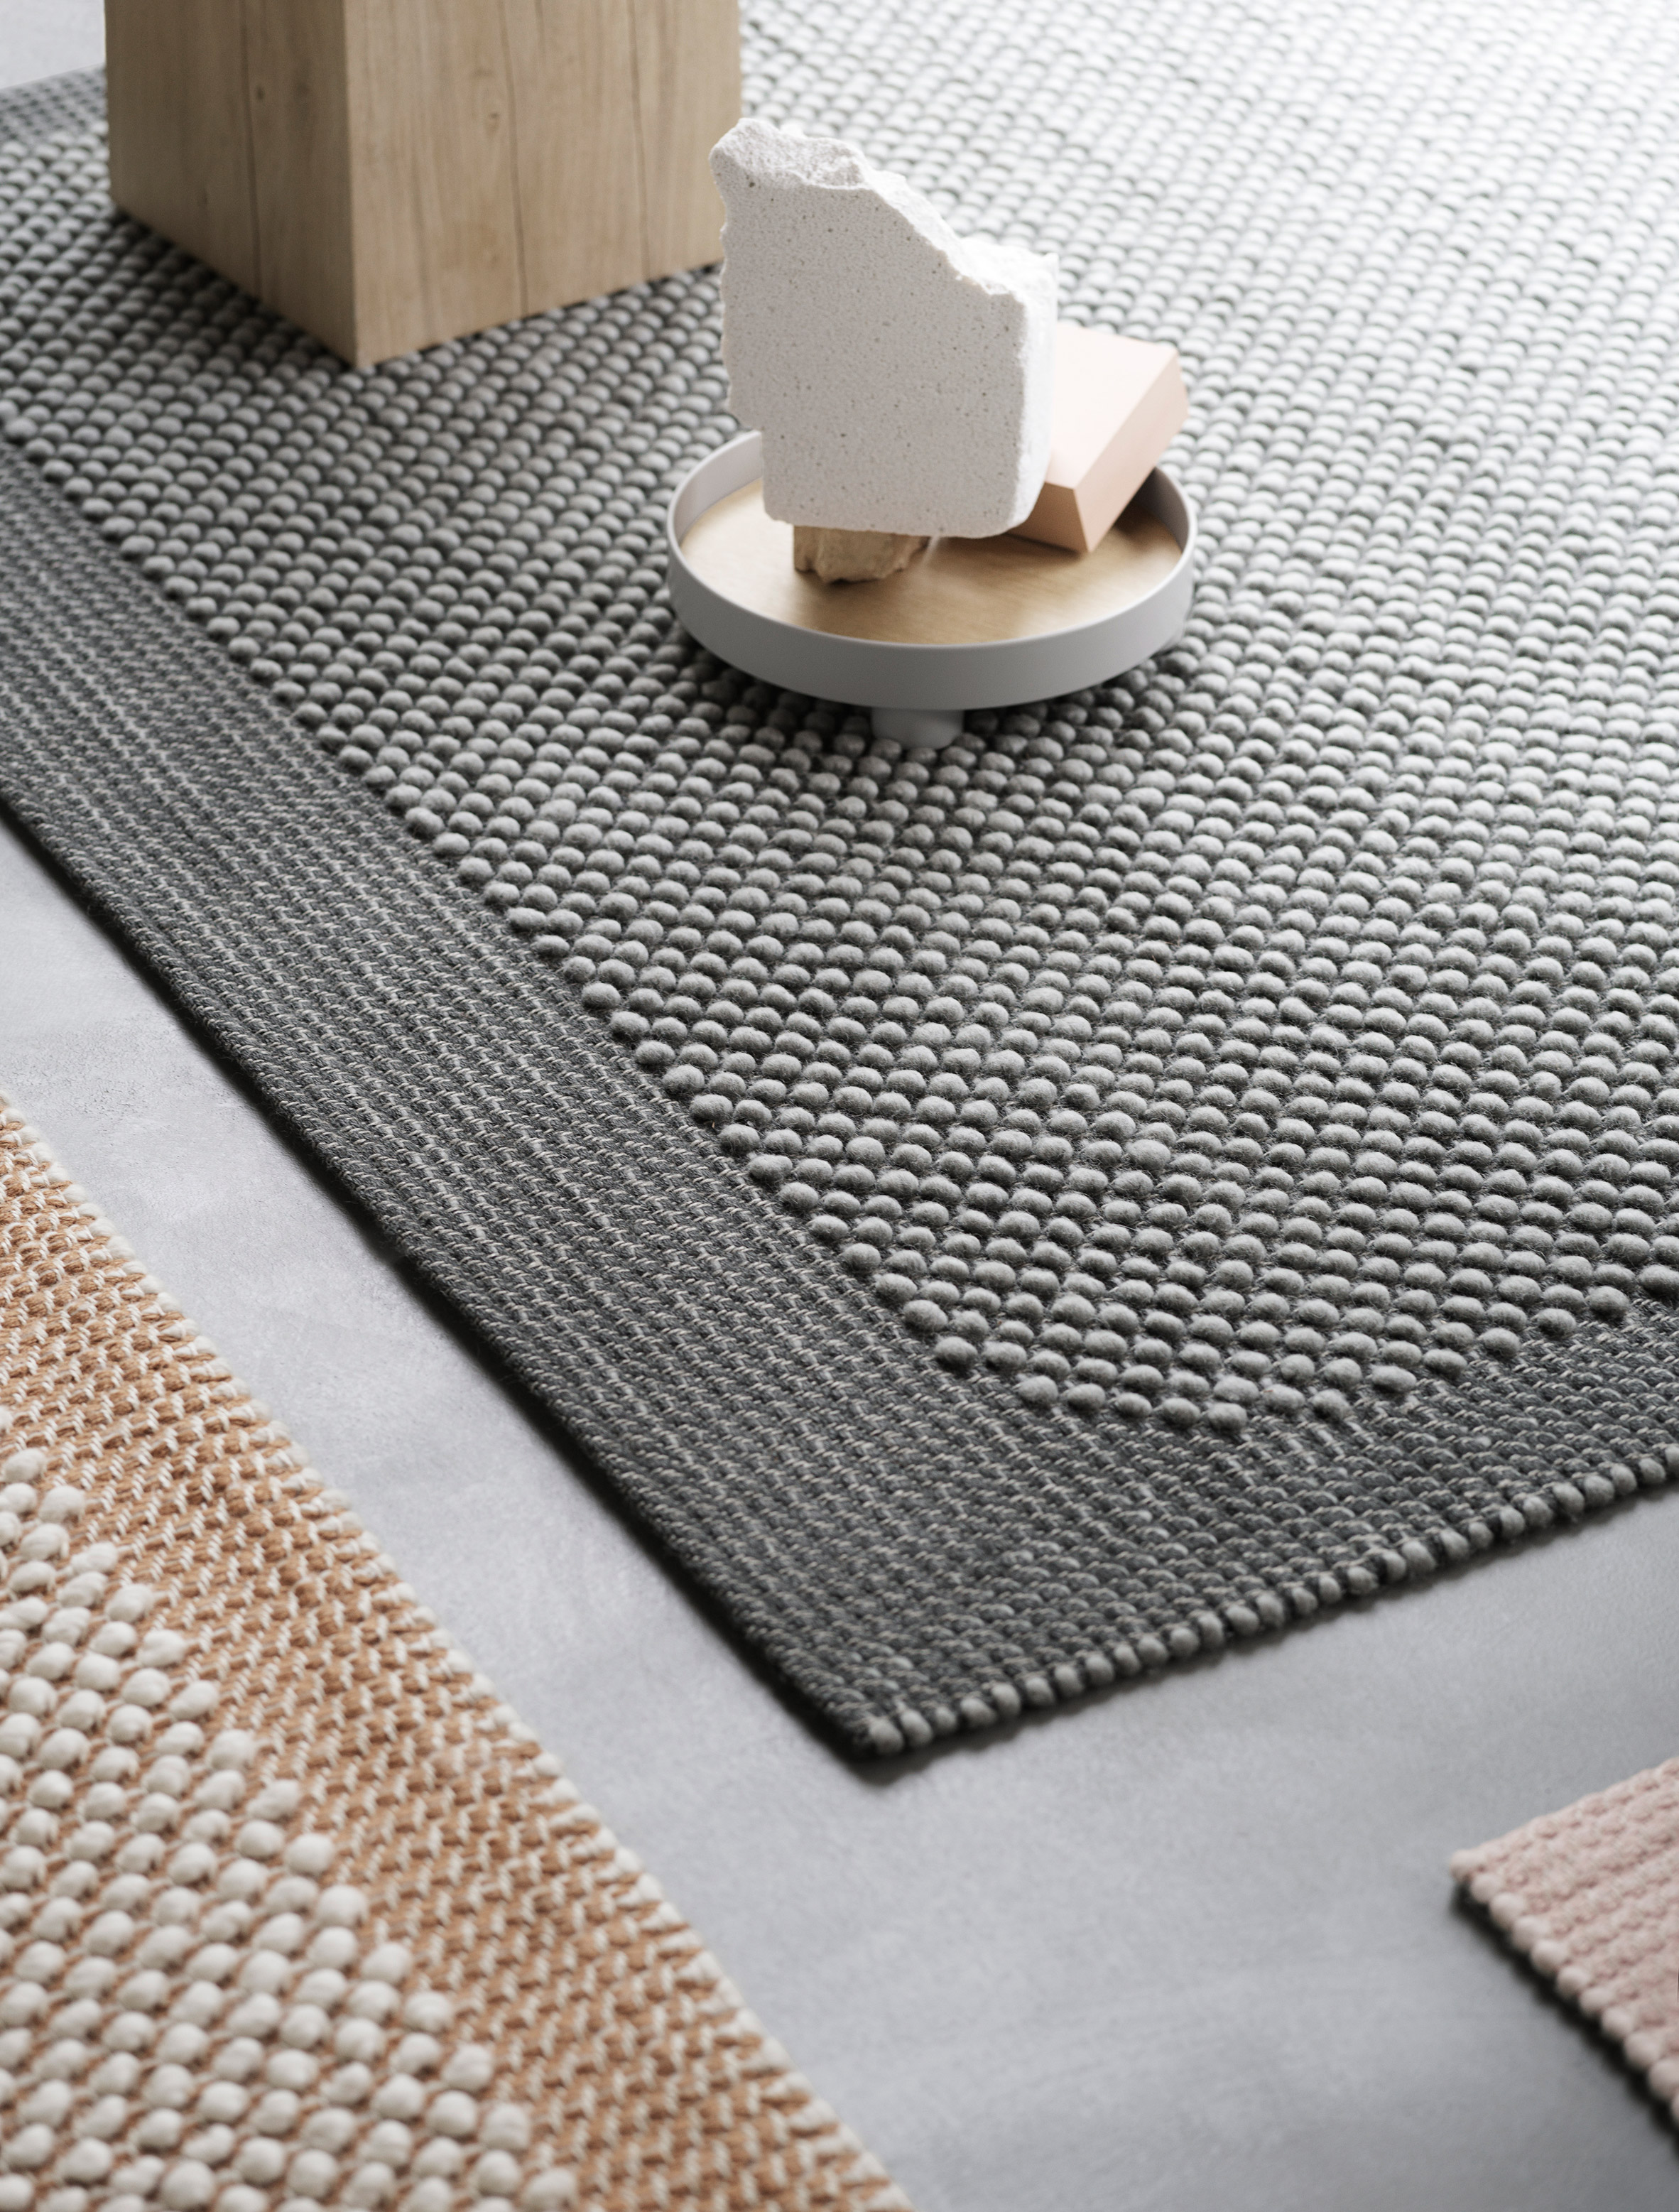 Muuto debuts bobbly rugs that feel like pebbles underfoot